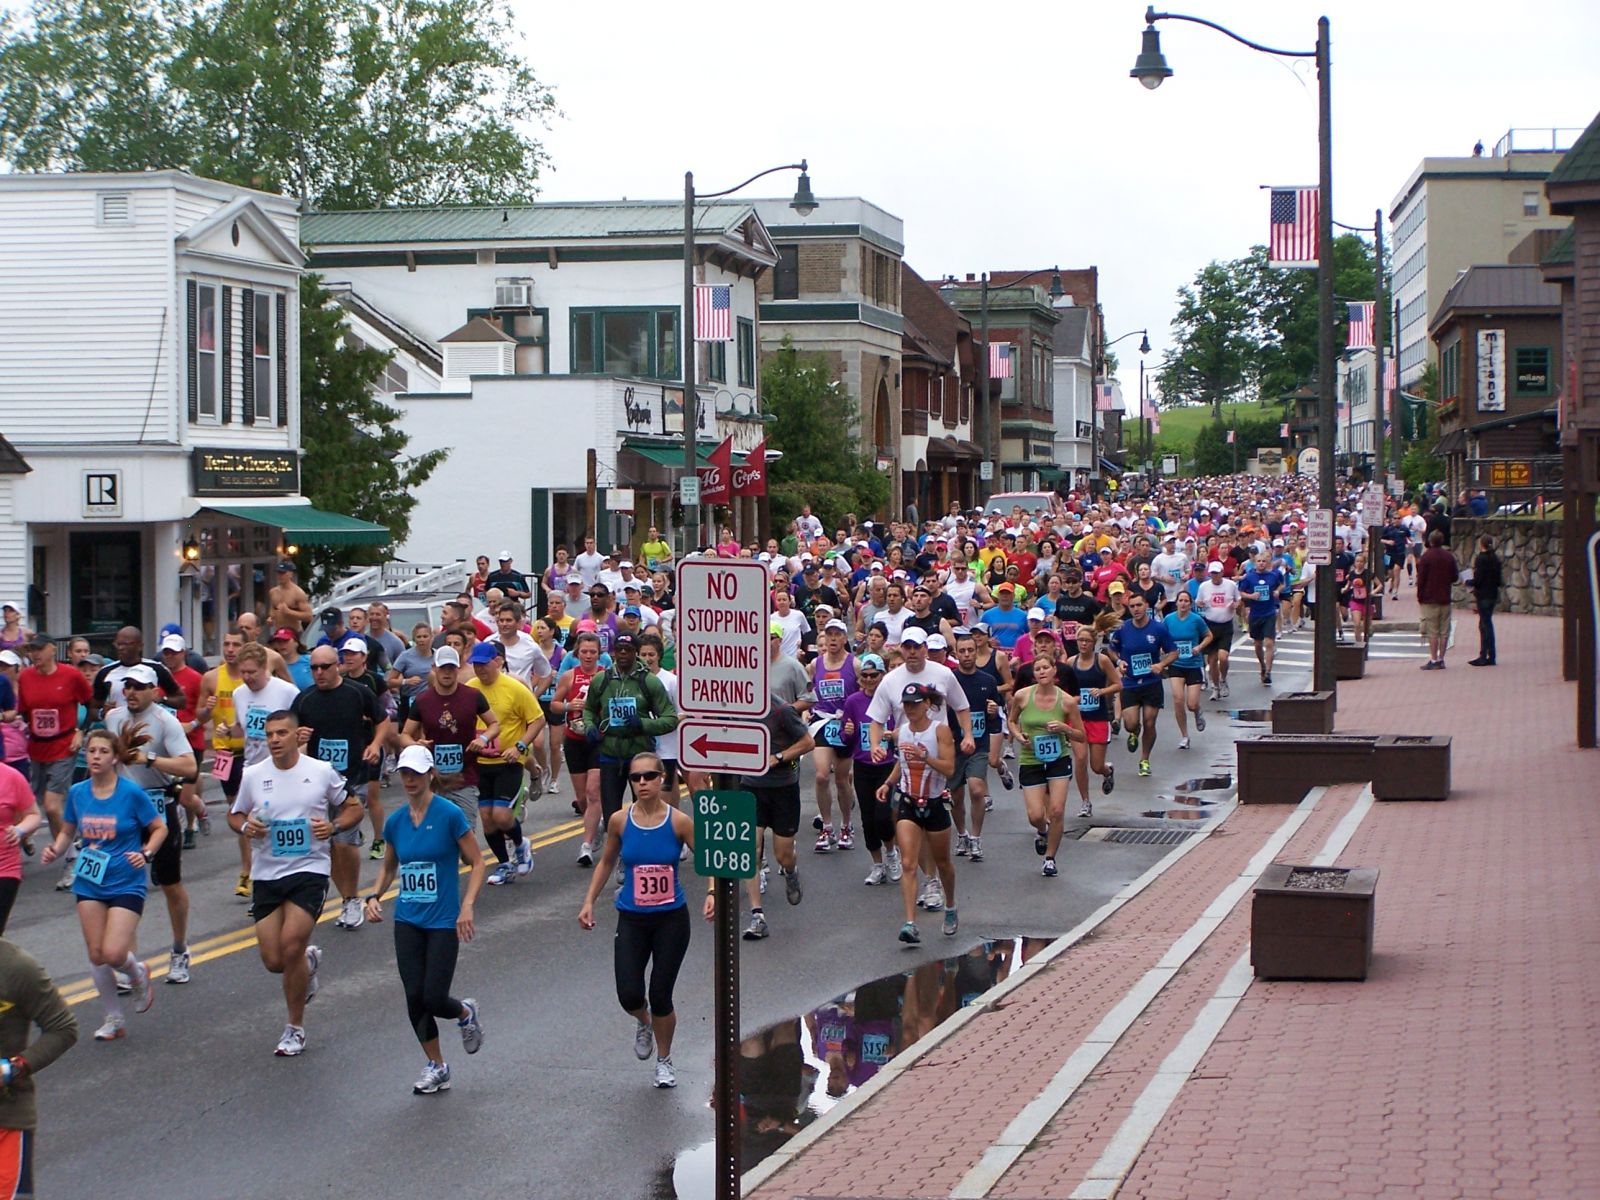 Runners in the Lake Placid Marathon engulf Main Street at the beginning of the race